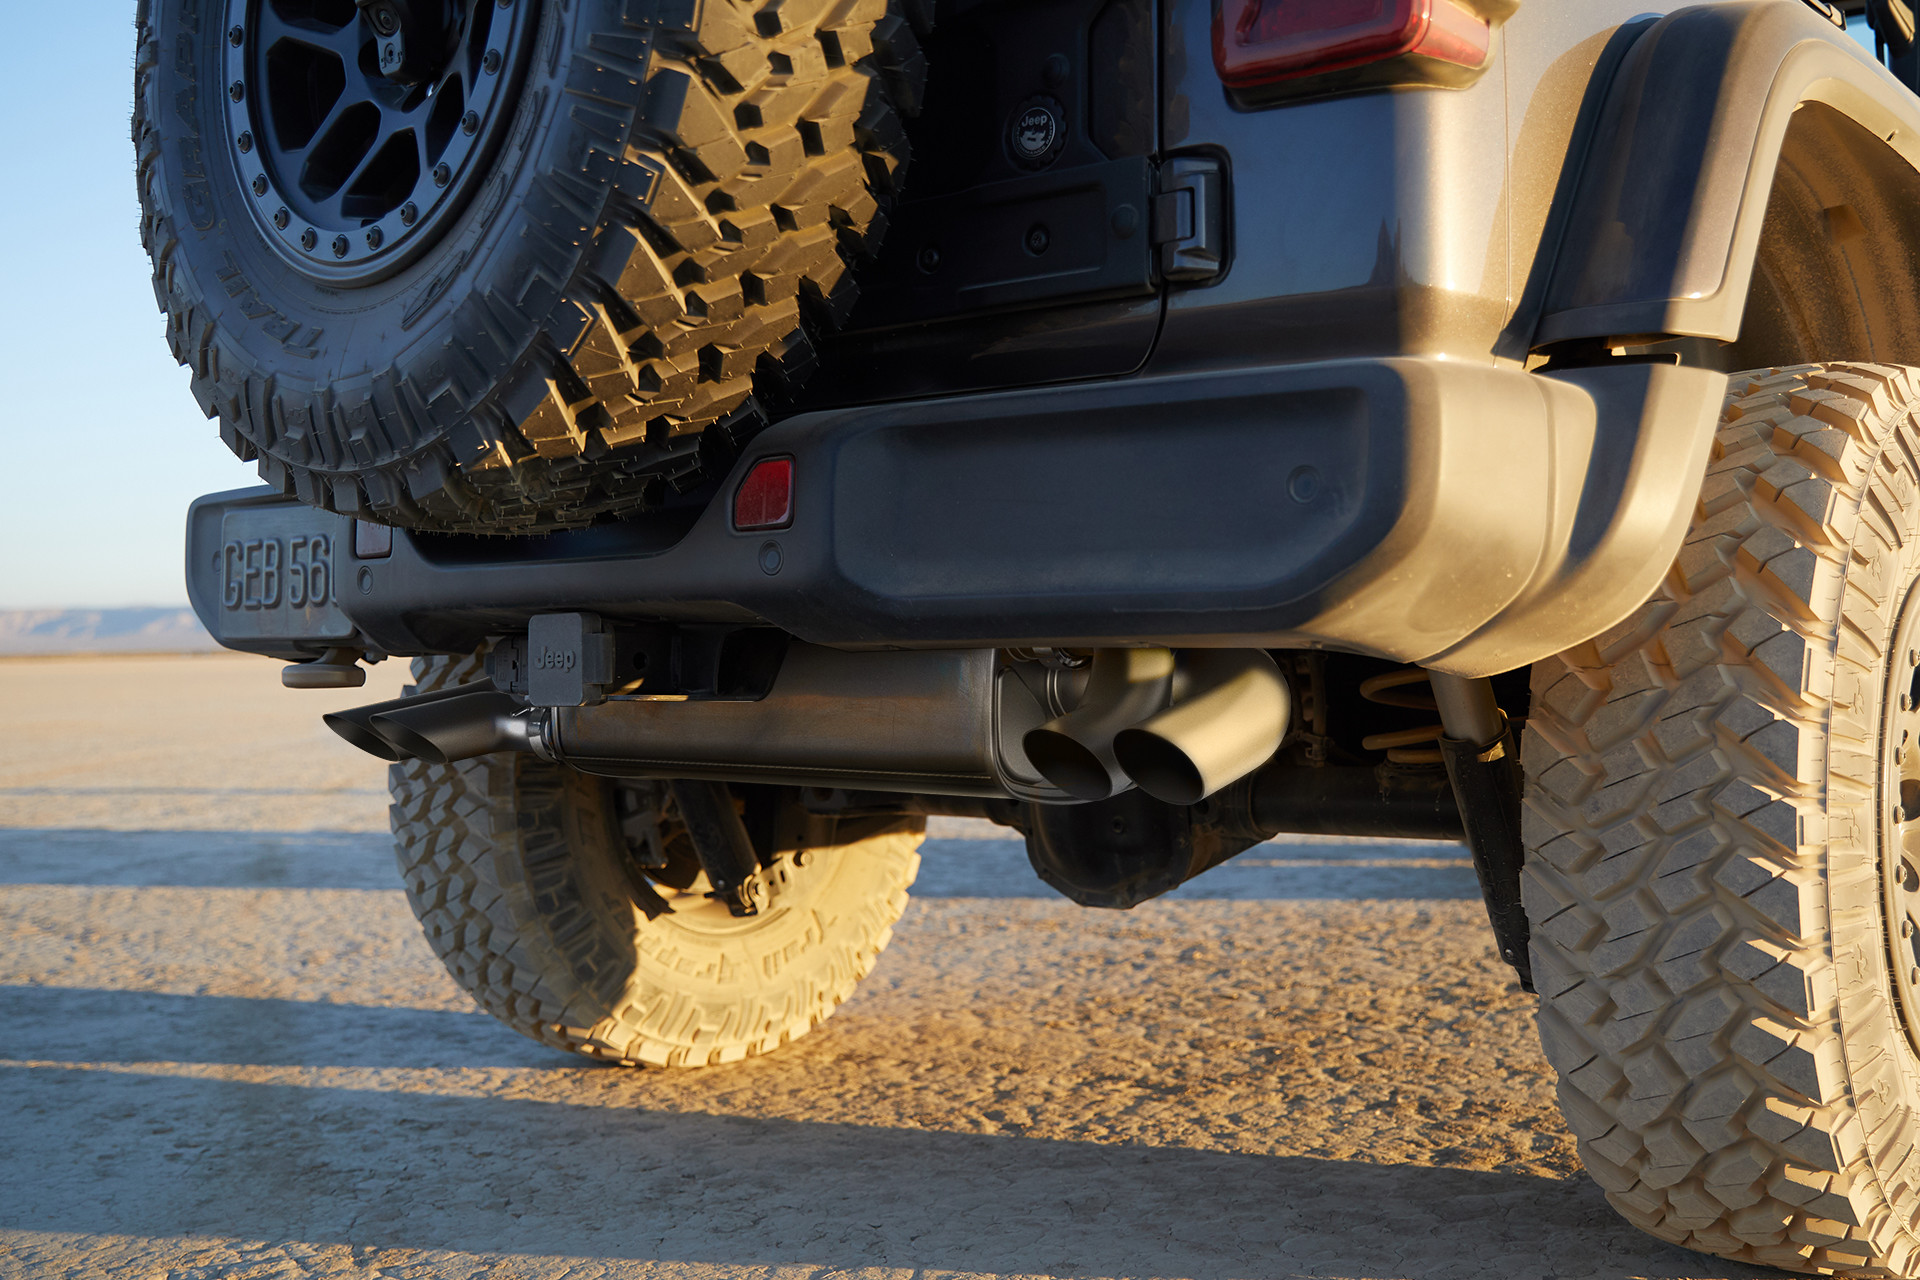 2022 Wrangler Rubicon 392 in Granite parked on sand, close up of exhaust and dusty rear wheels.